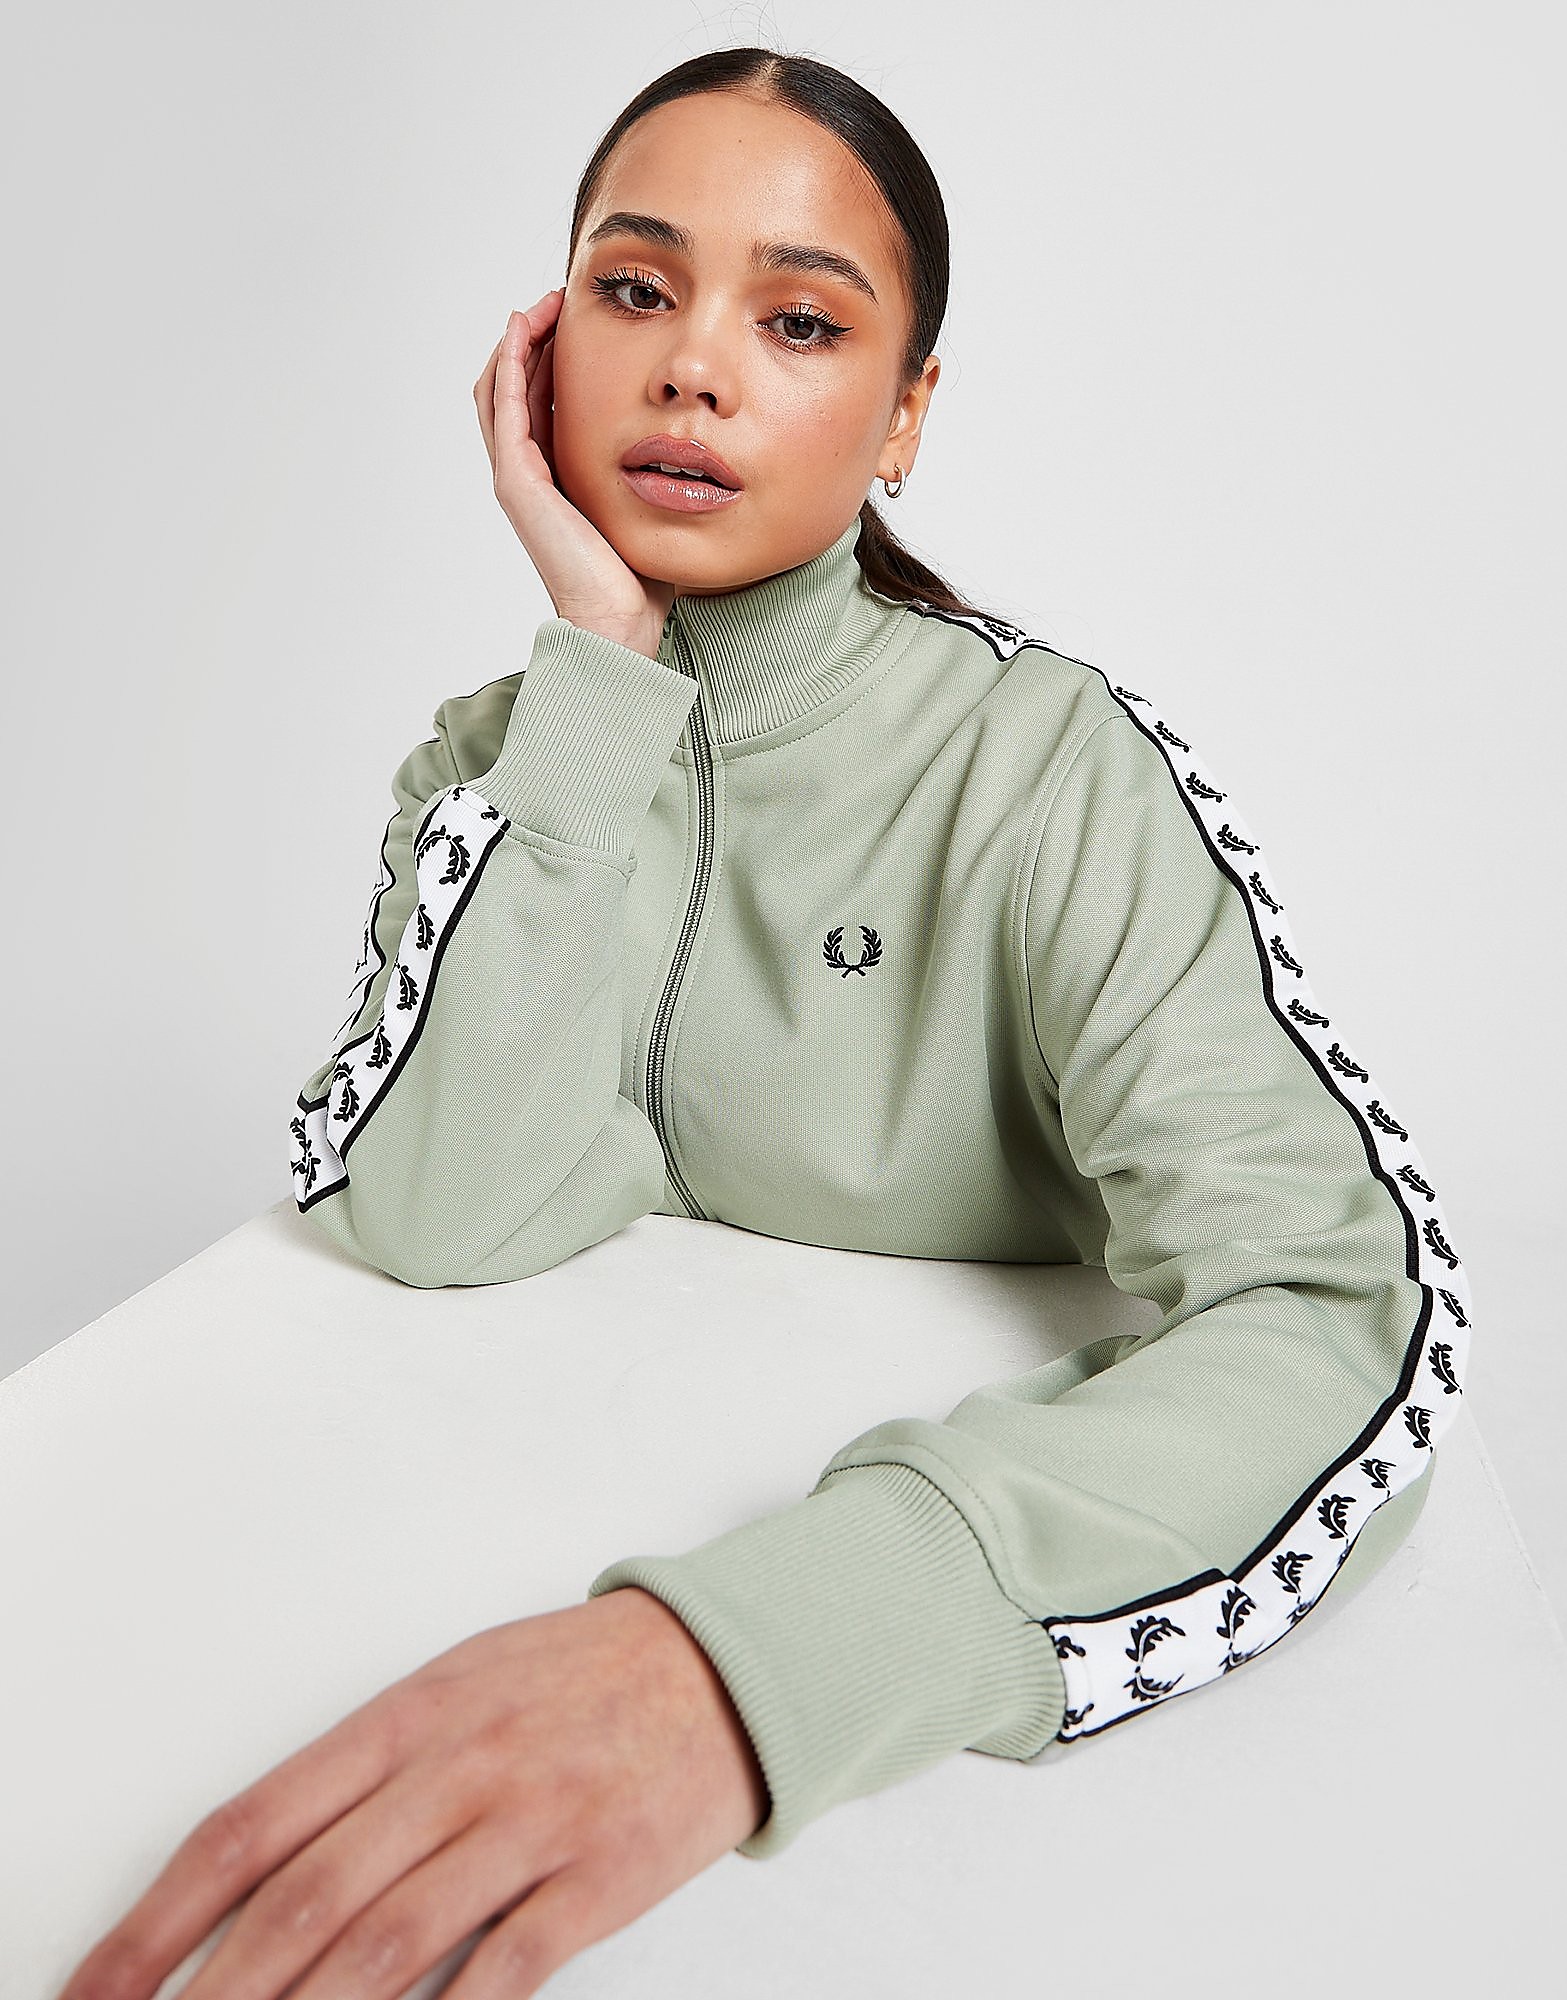 Fred perry tape crop track jacket - womens, vihreä, fred perry